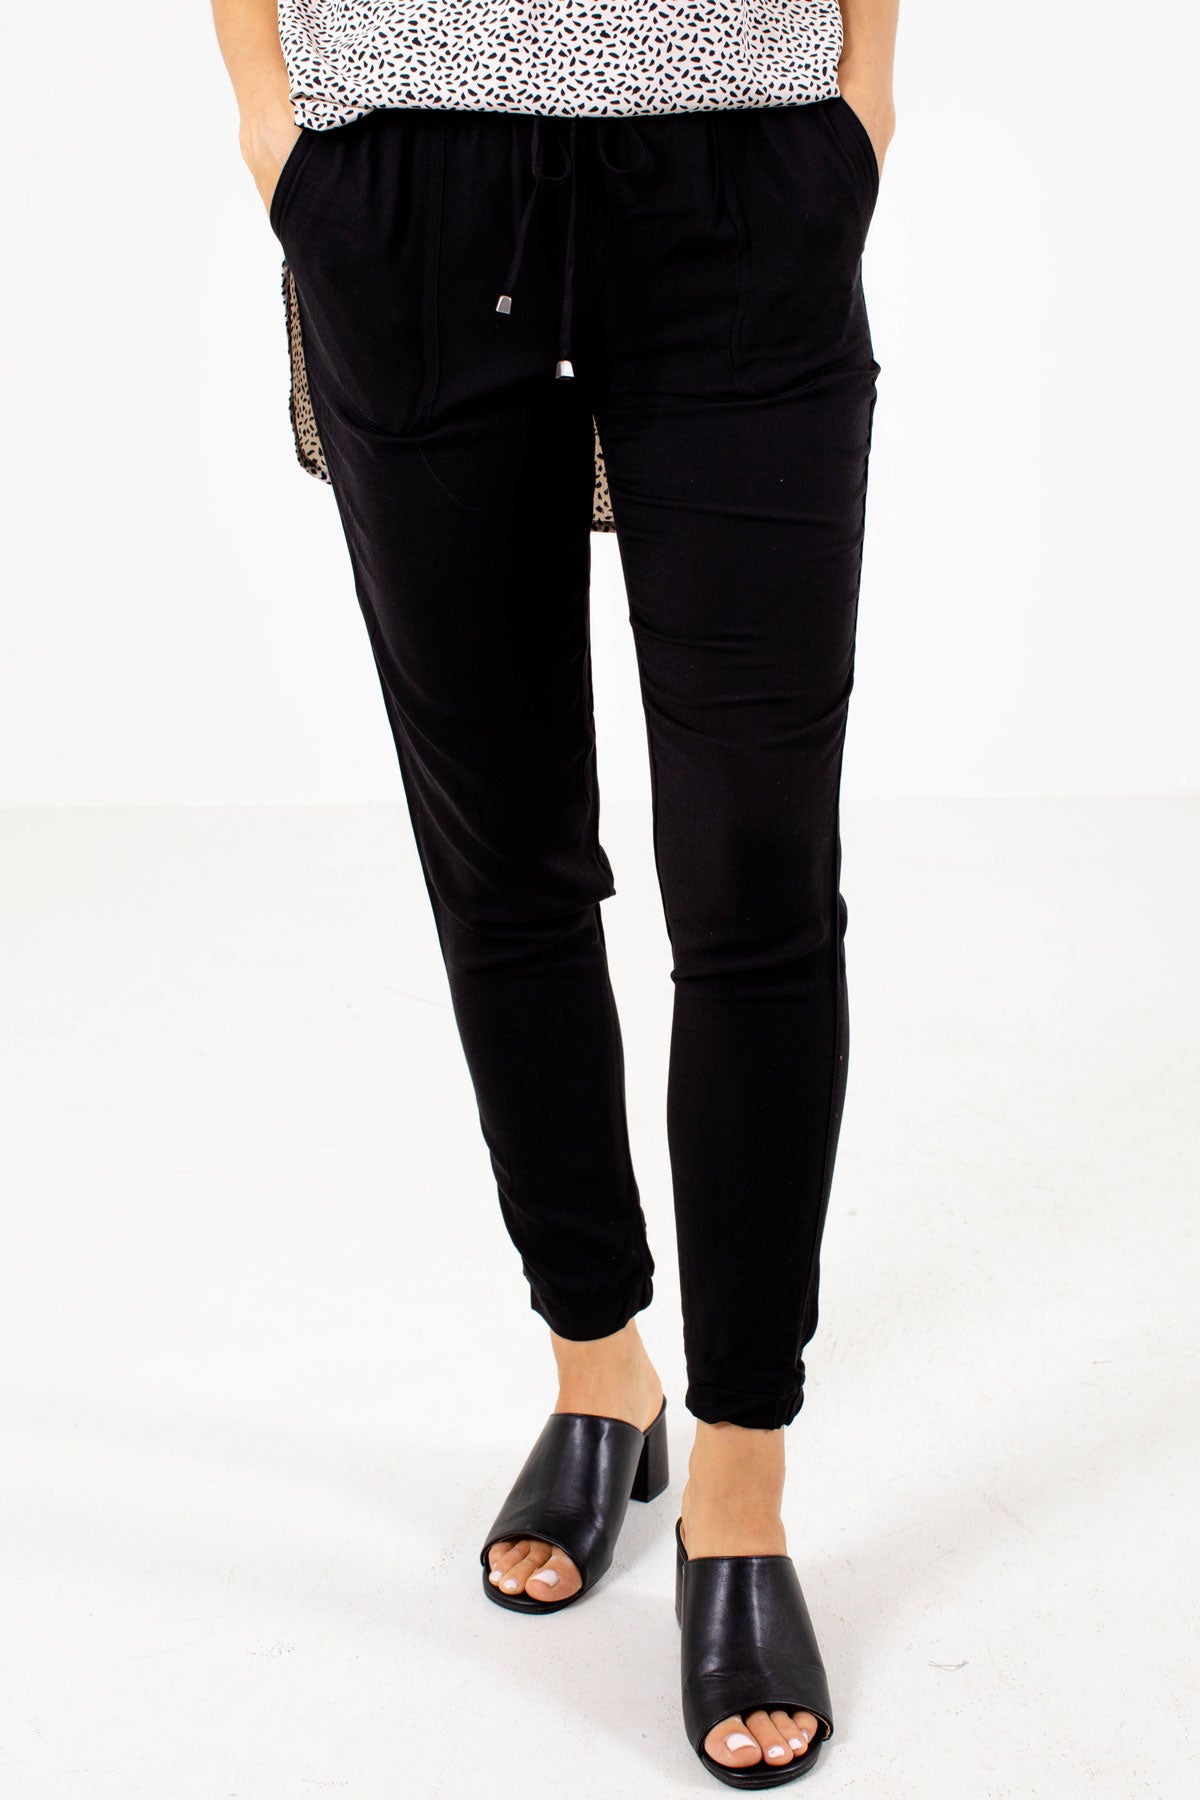 Black Cute and Comfortable Boutique Joggers for Women